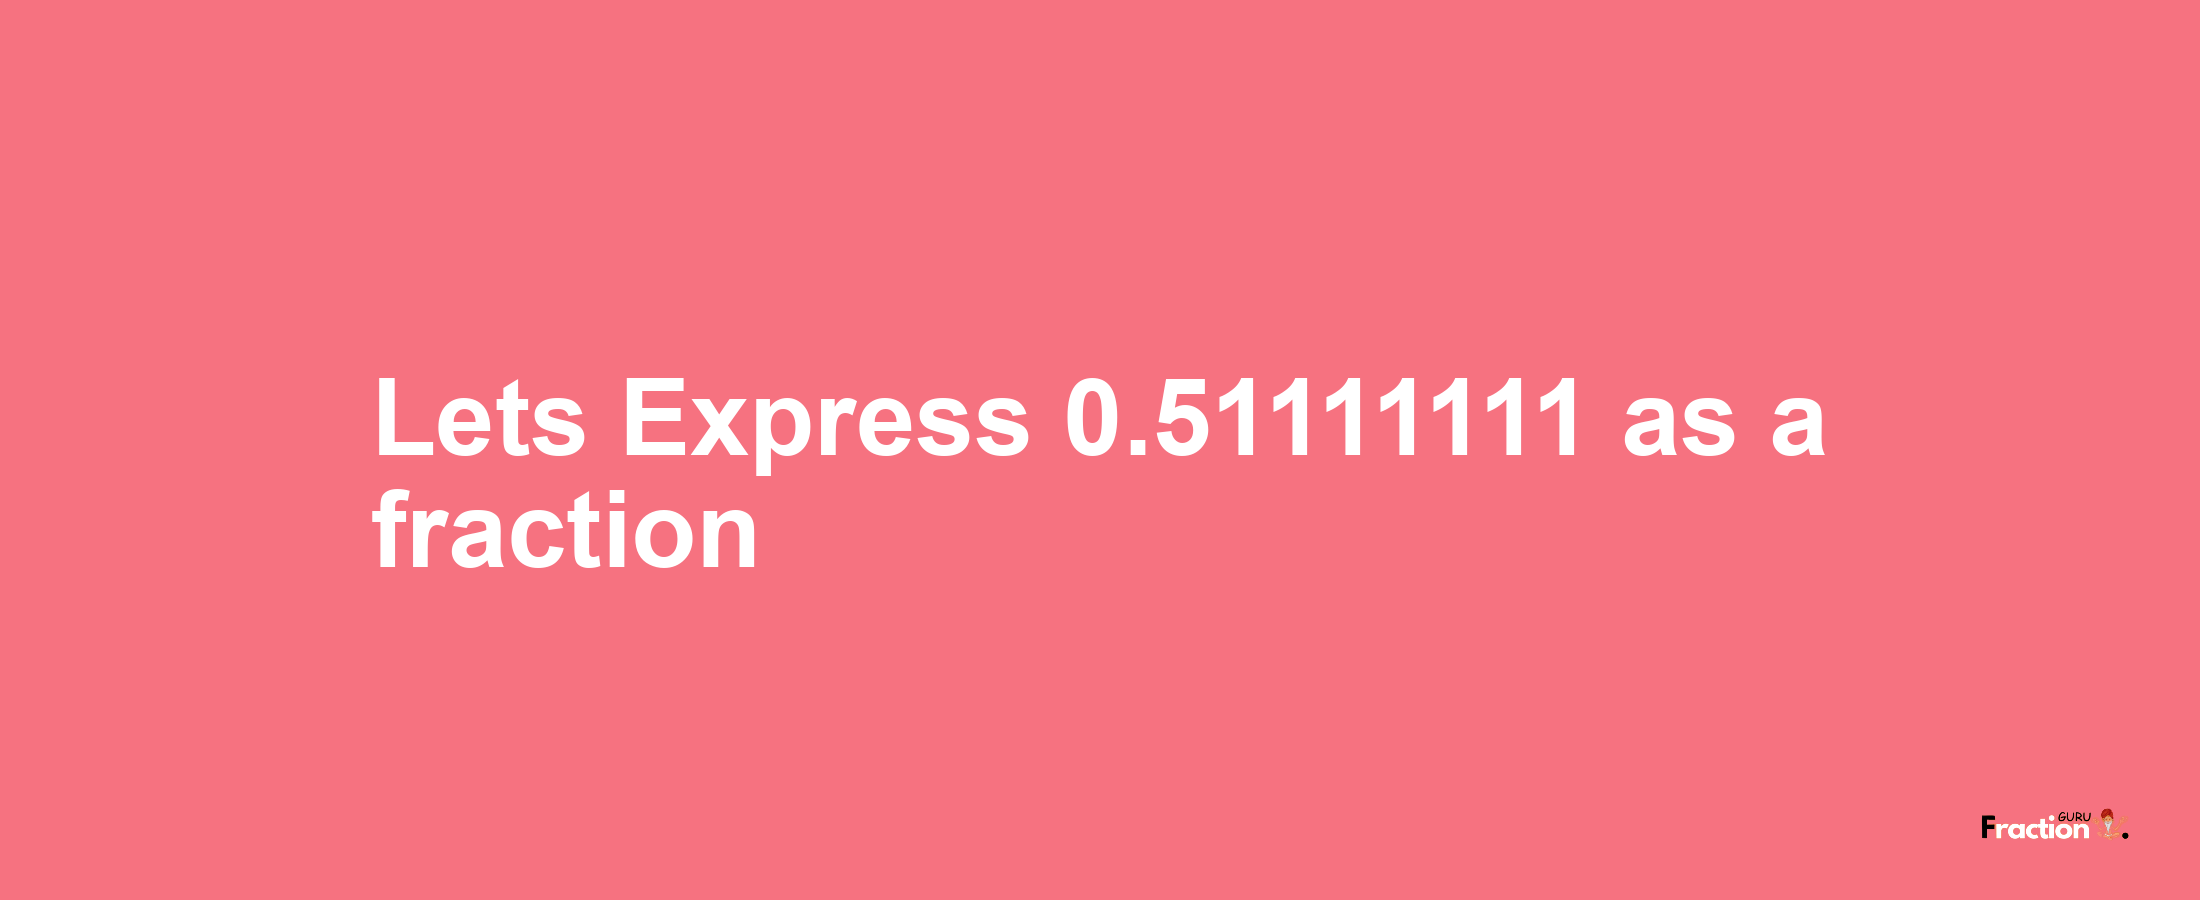 Lets Express 0.51111111 as afraction